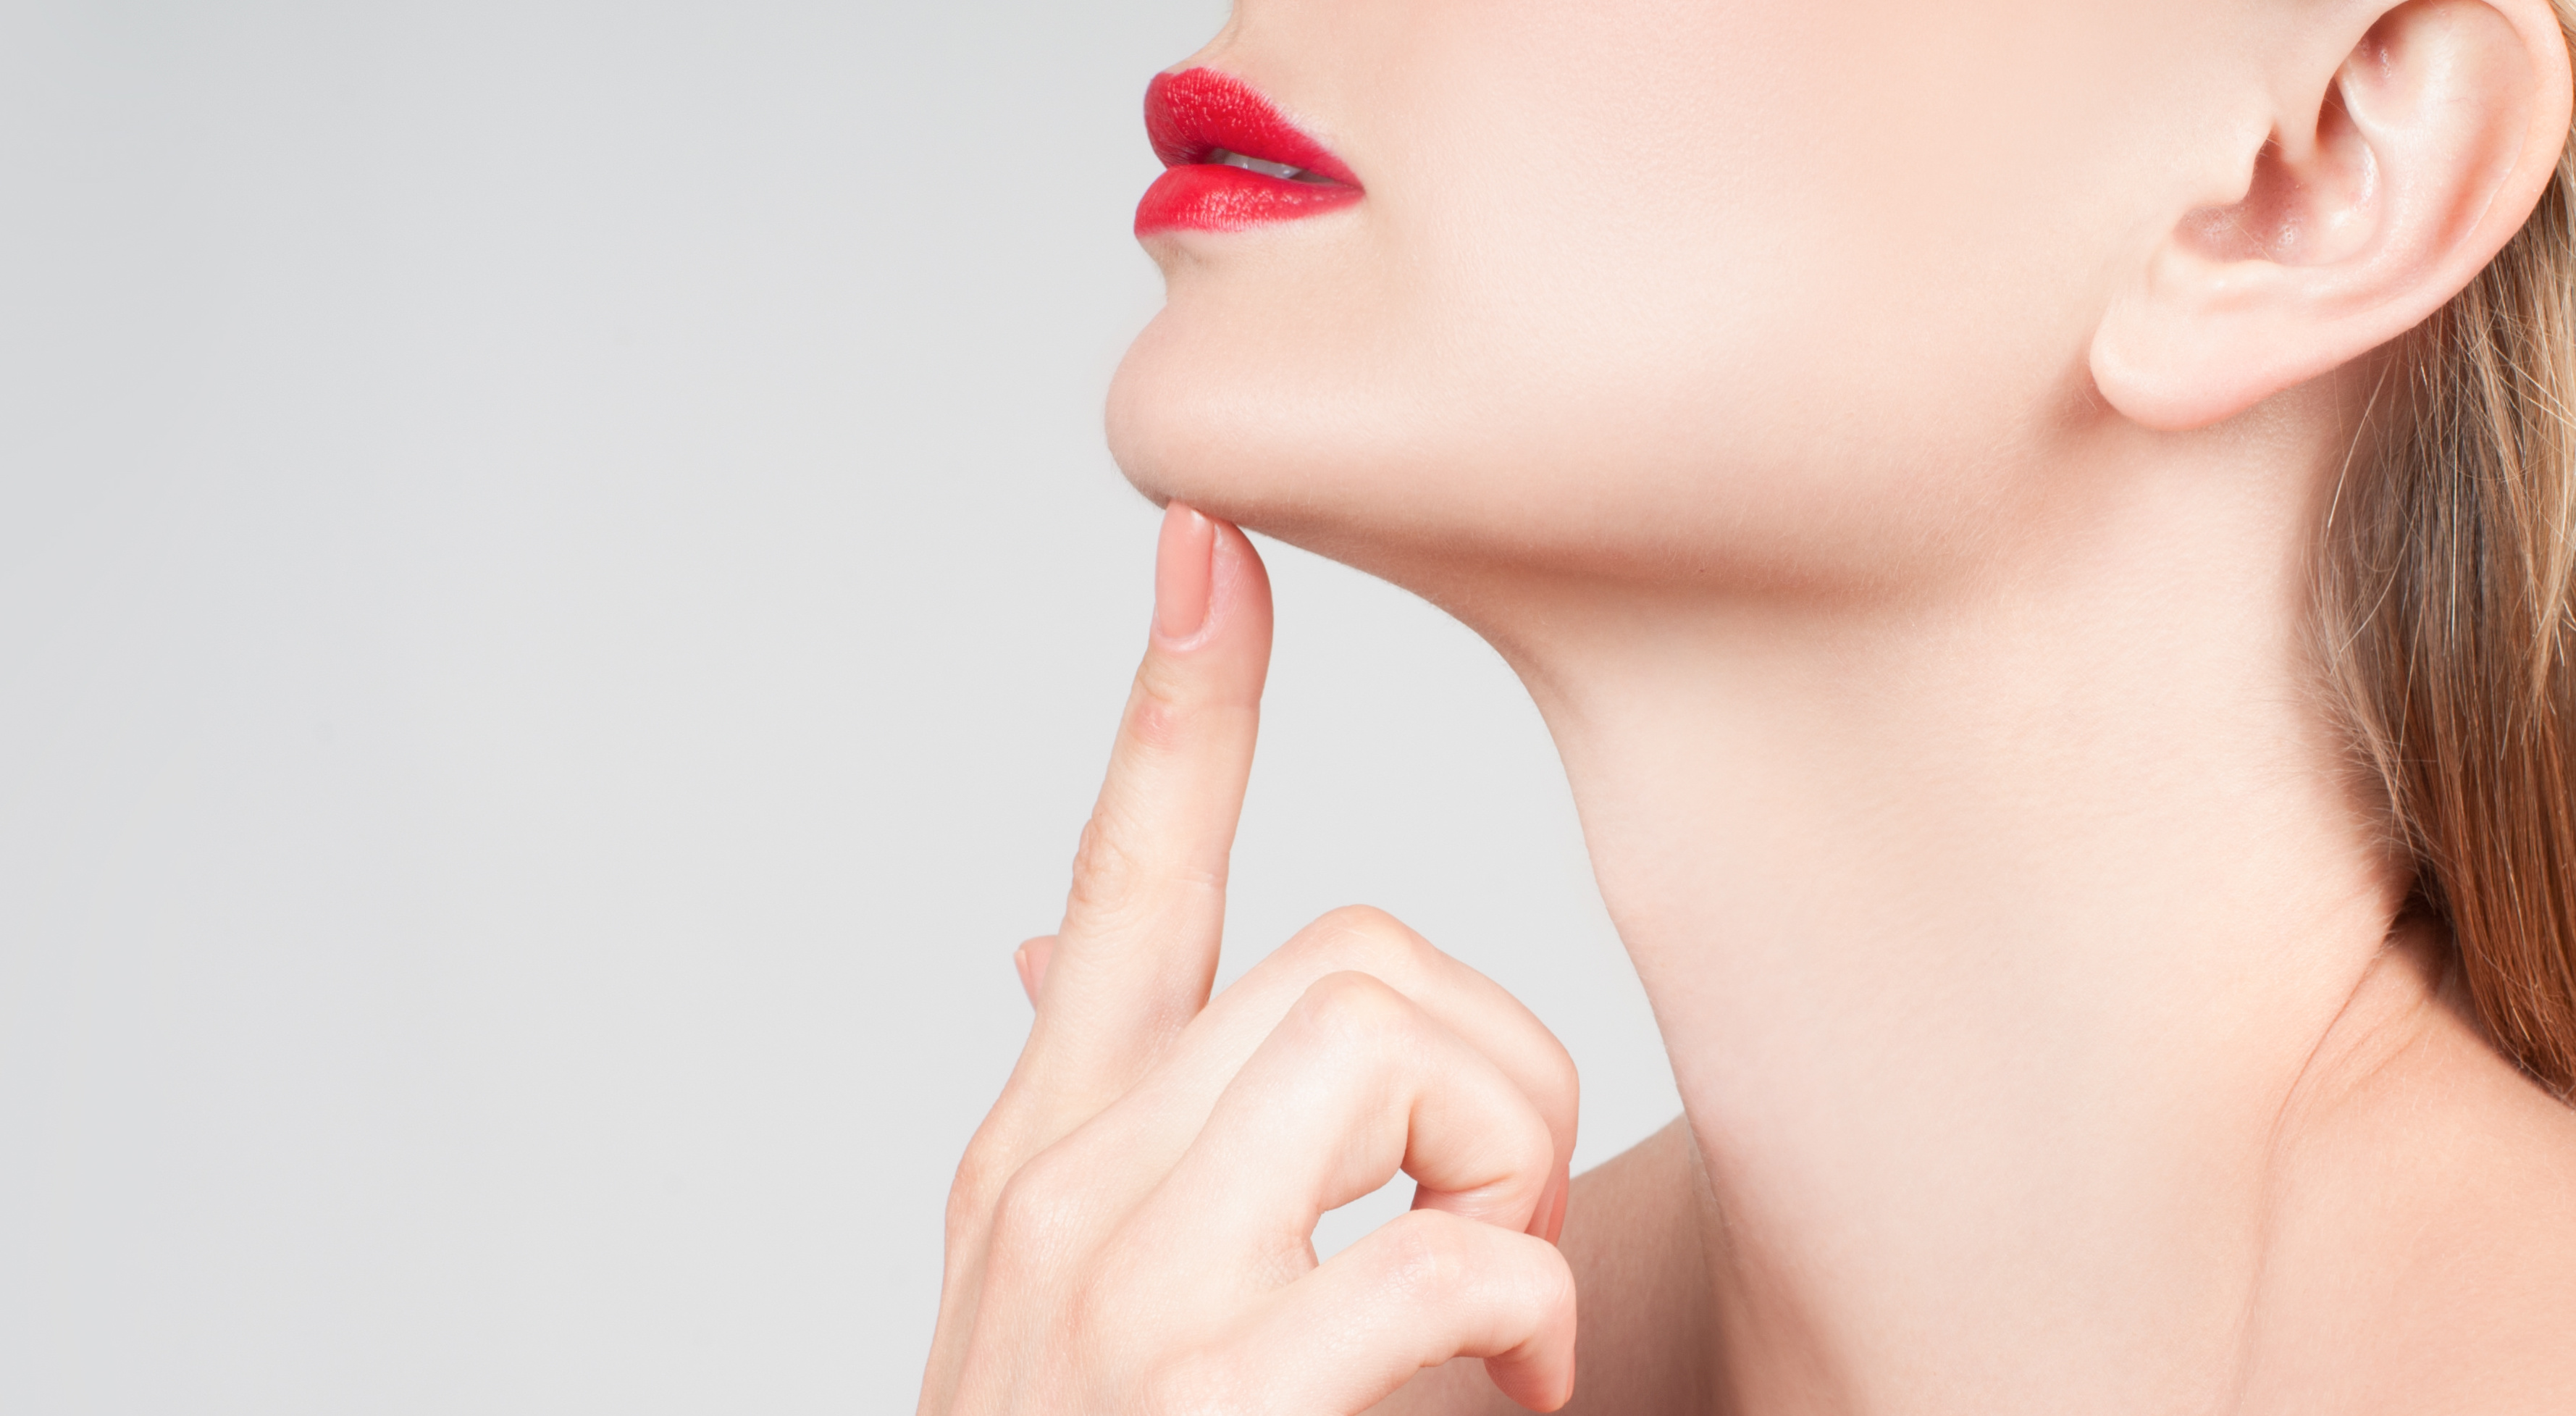 neck rejuvenation is possible with liposuction, kybella, neck lift or coolsculpting